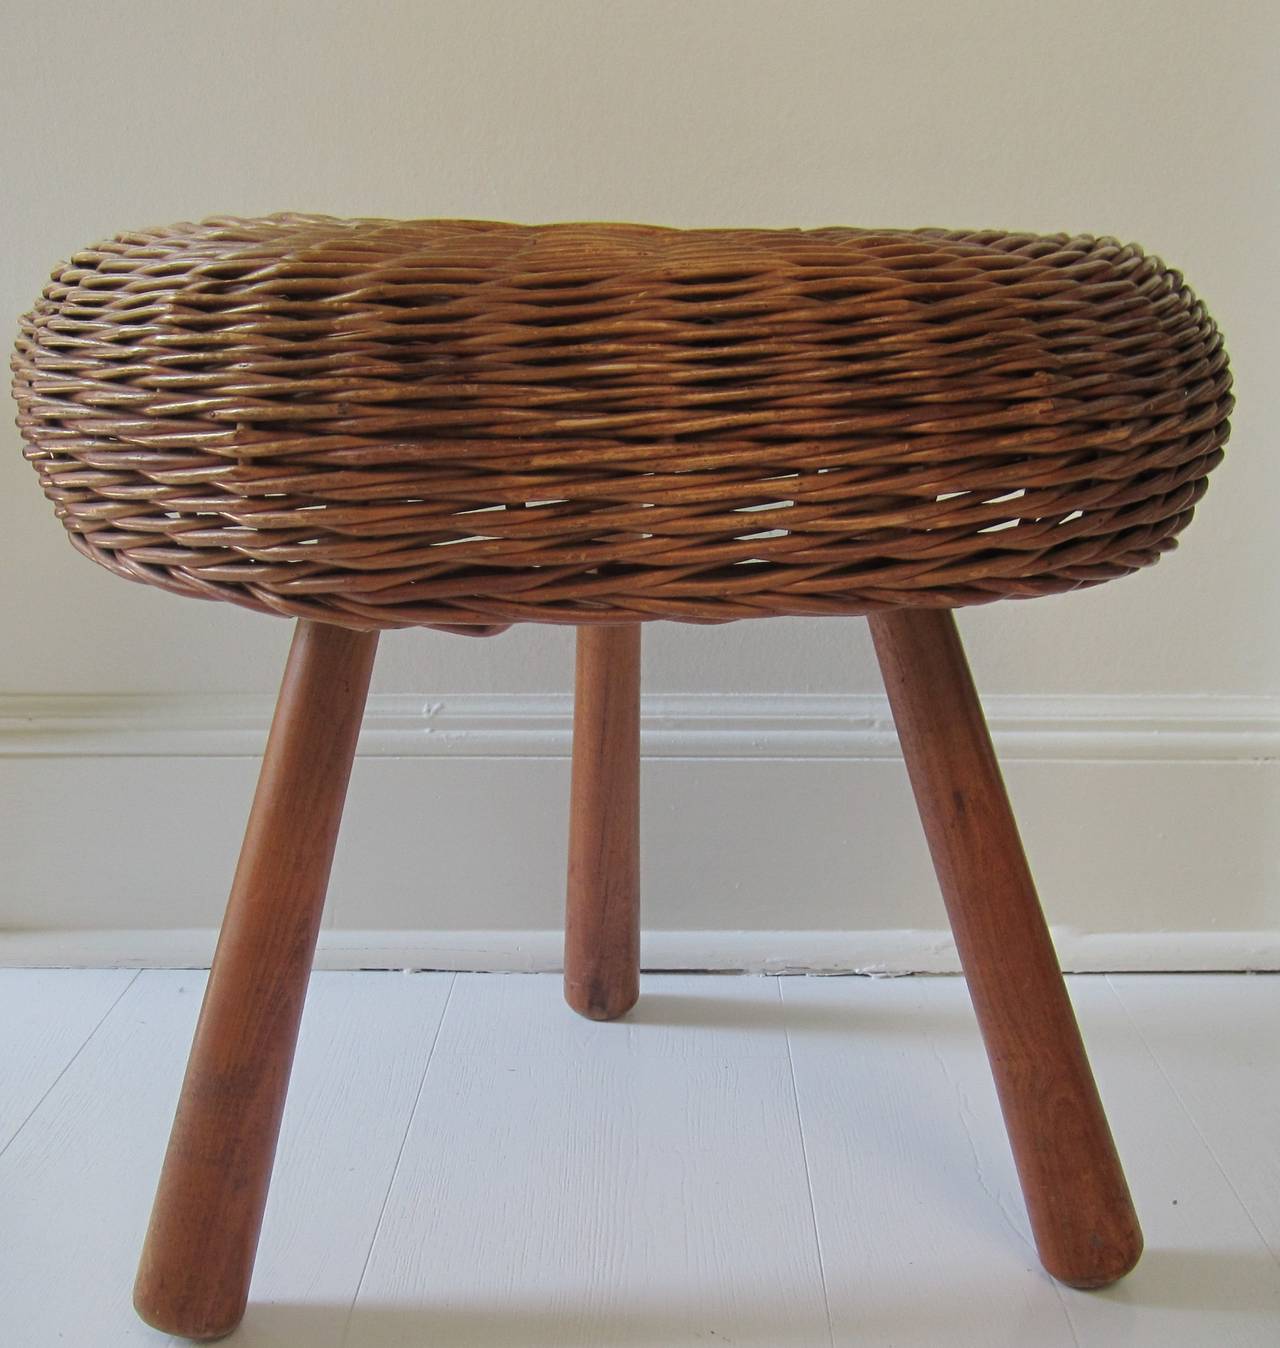 A vintage Mid-Century European wicker 'tri-pod' stool or low side table. Marked underneath, 'made in Yugoslavia' as show in image #6. Piece can be used as a side table providing there is a tray for stability (as show in image #7 and #9.)

Piece